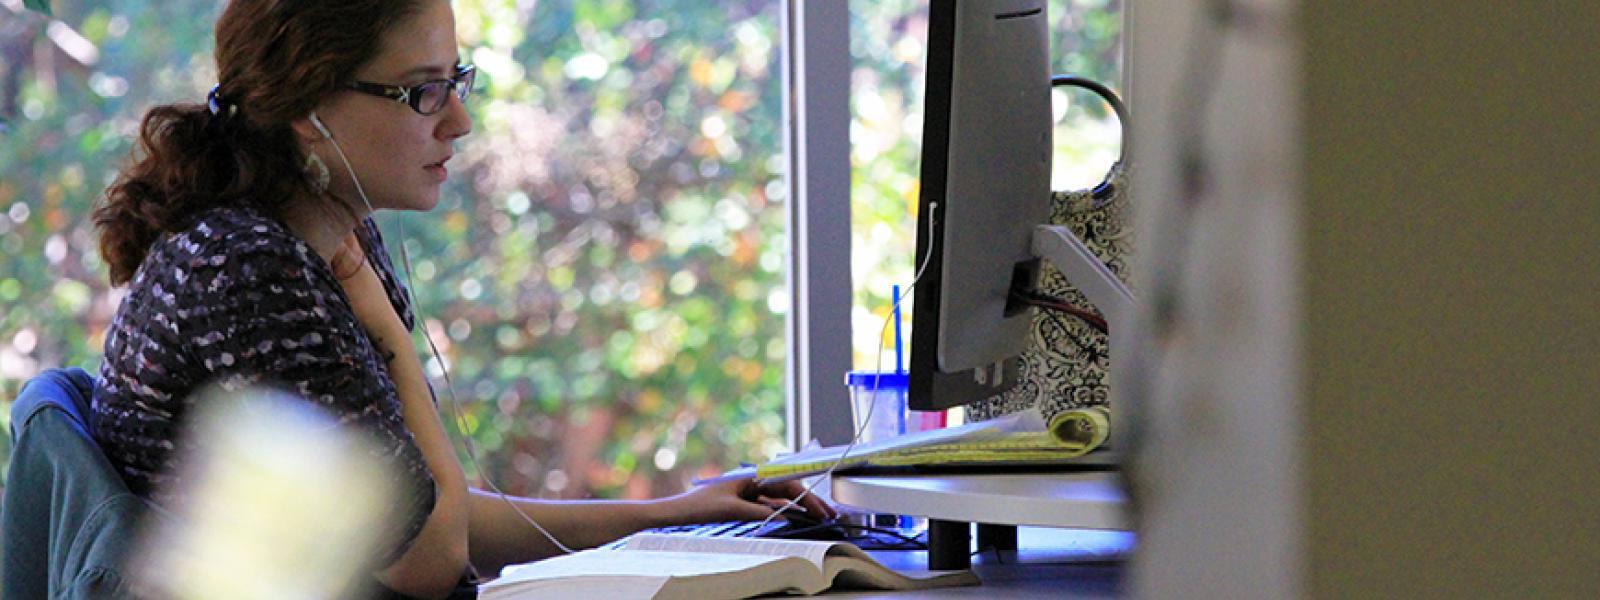 In this photo, a CIU student is using one of the computers in the computer lab.